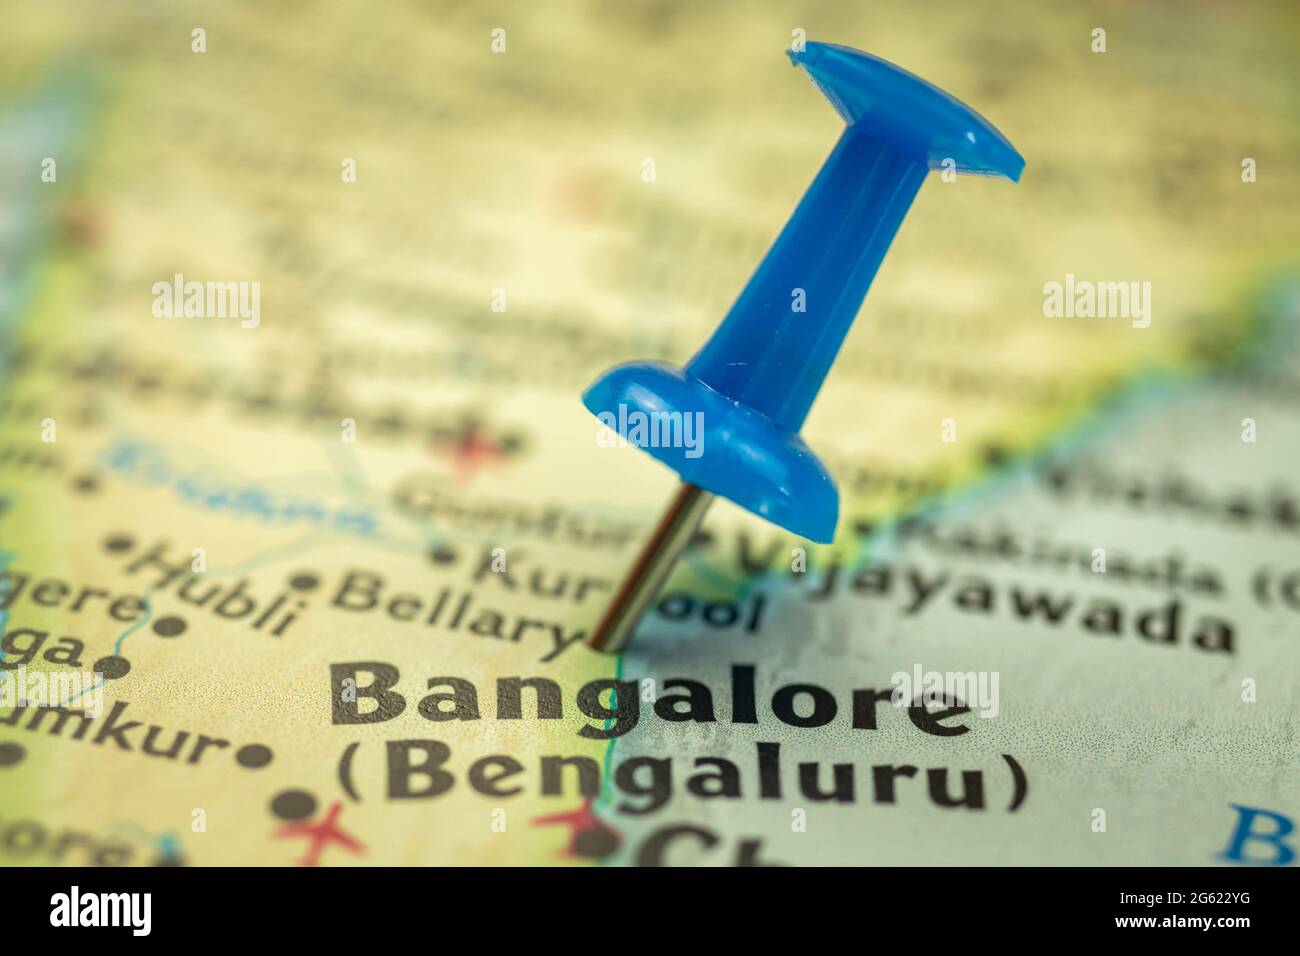 Location Bangalore in India, travel map with push pin point marker closeup, Asia journey concept Stock Photo